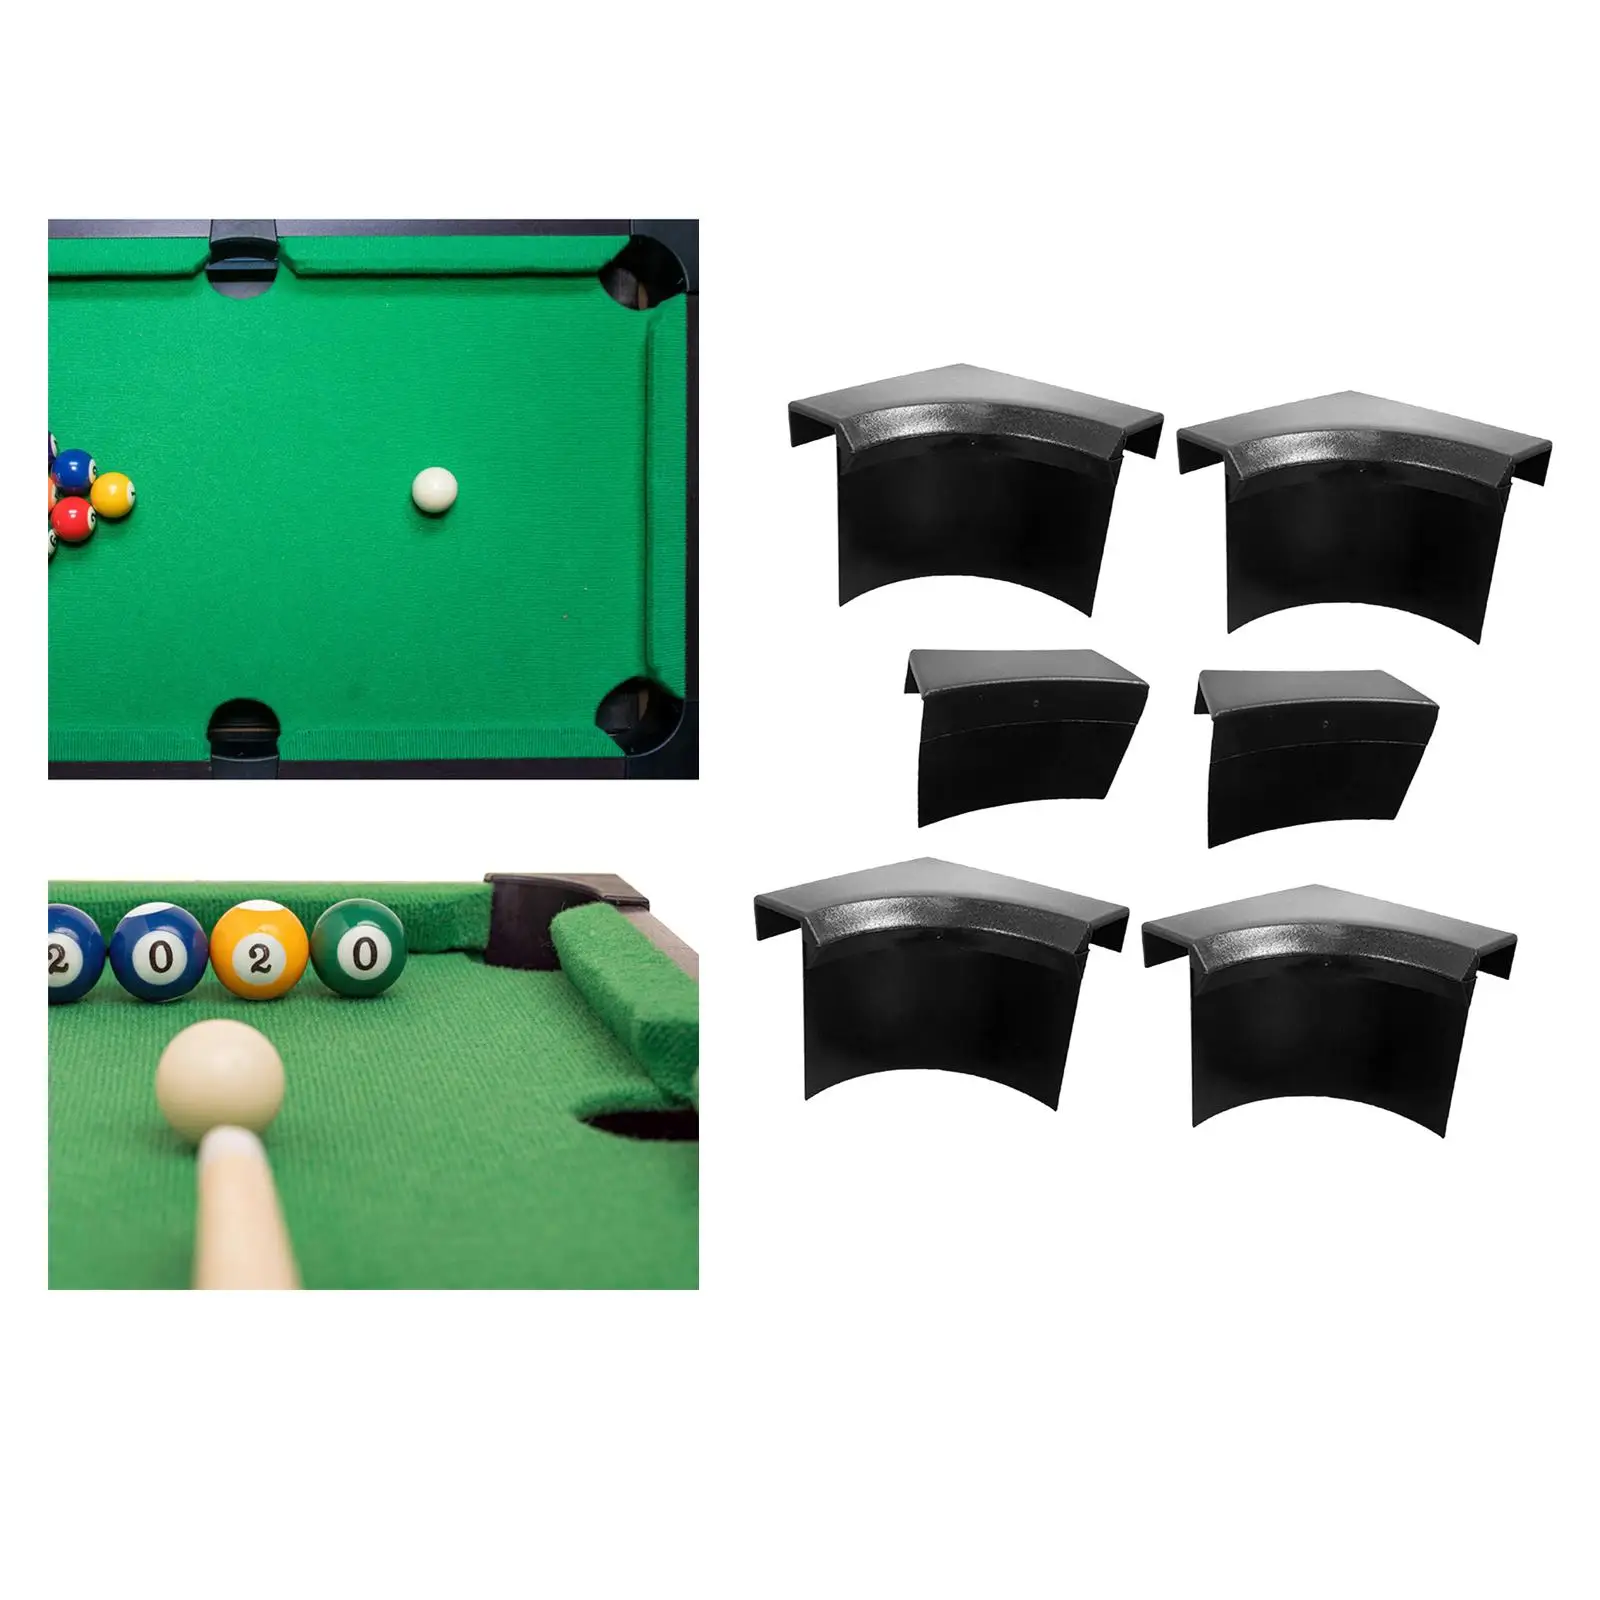 6Pcs Pool Table Billiard Pocket Hole Liners Snooker Replacement Accessory